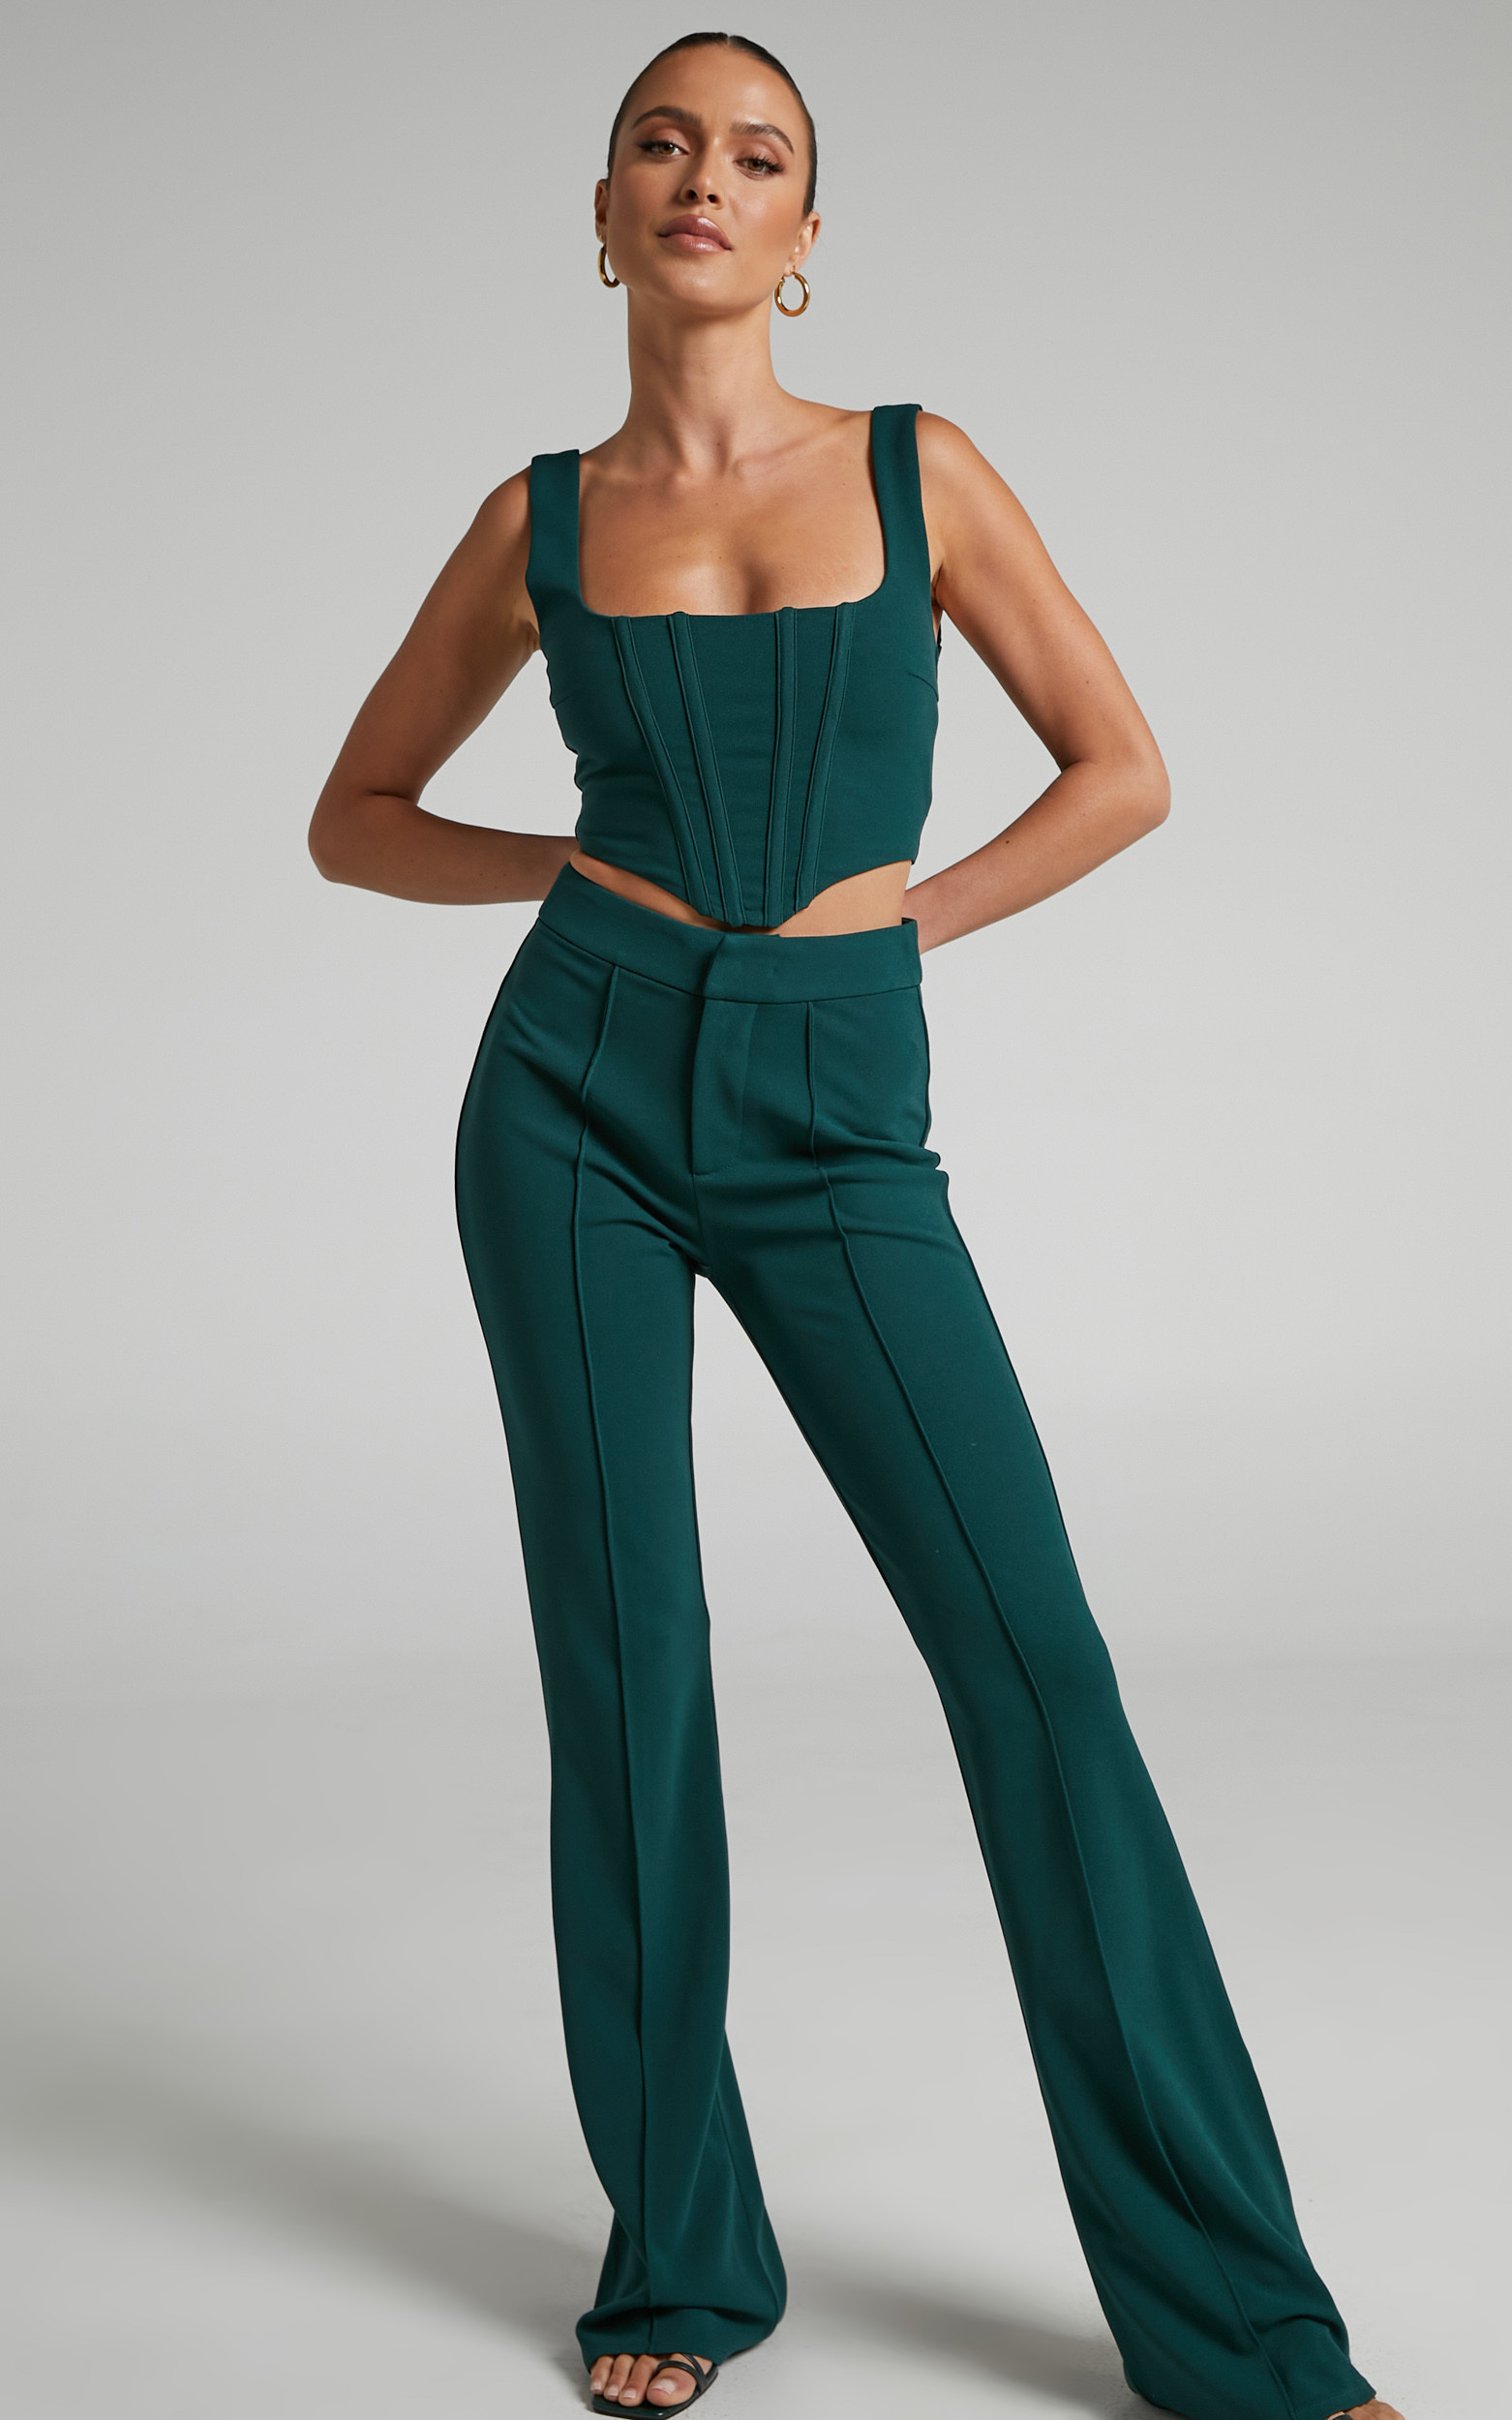 Ritta Corset Top and Pants Two Piece Set in Emerald - 06, GRN1, hi-res image number null